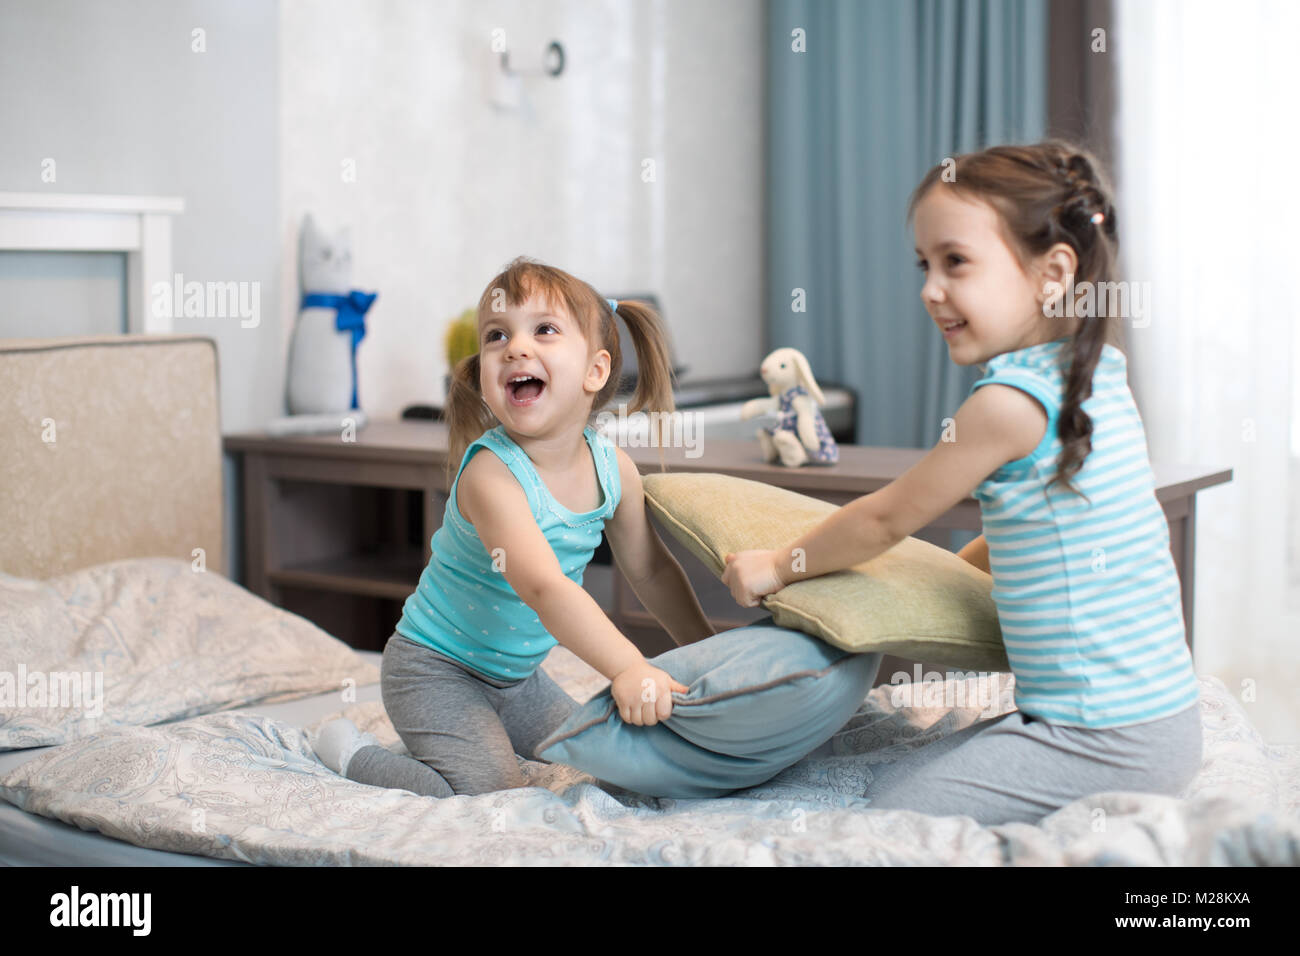 Kids girls fighting using pillows in bedroom Stock Photo